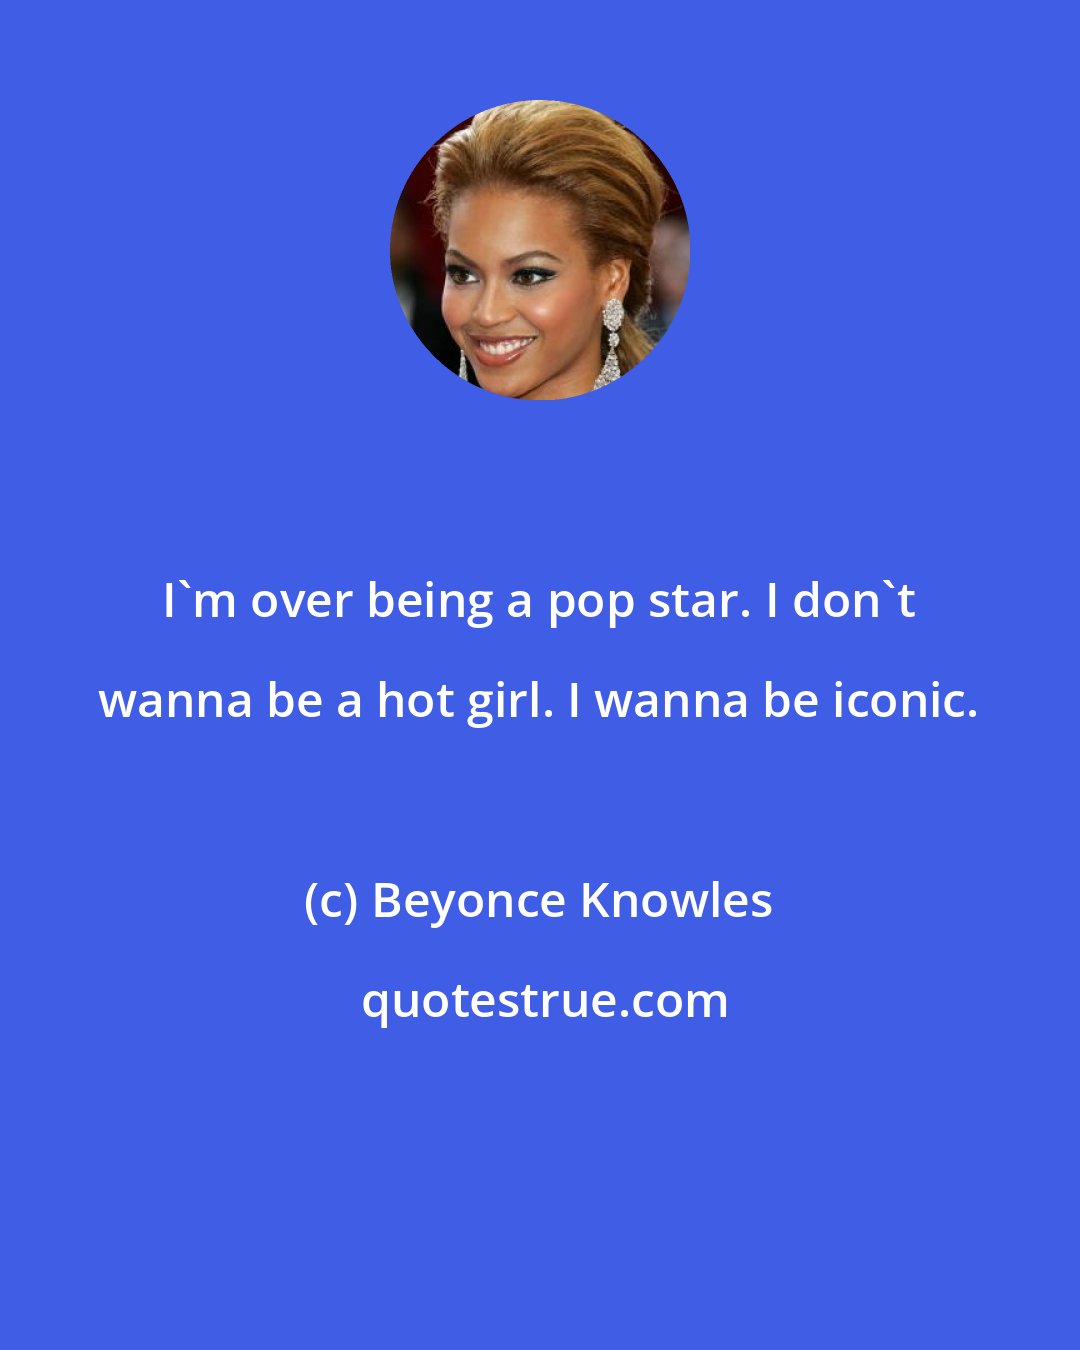 Beyonce Knowles: I'm over being a pop star. I don't wanna be a hot girl. I wanna be iconic.